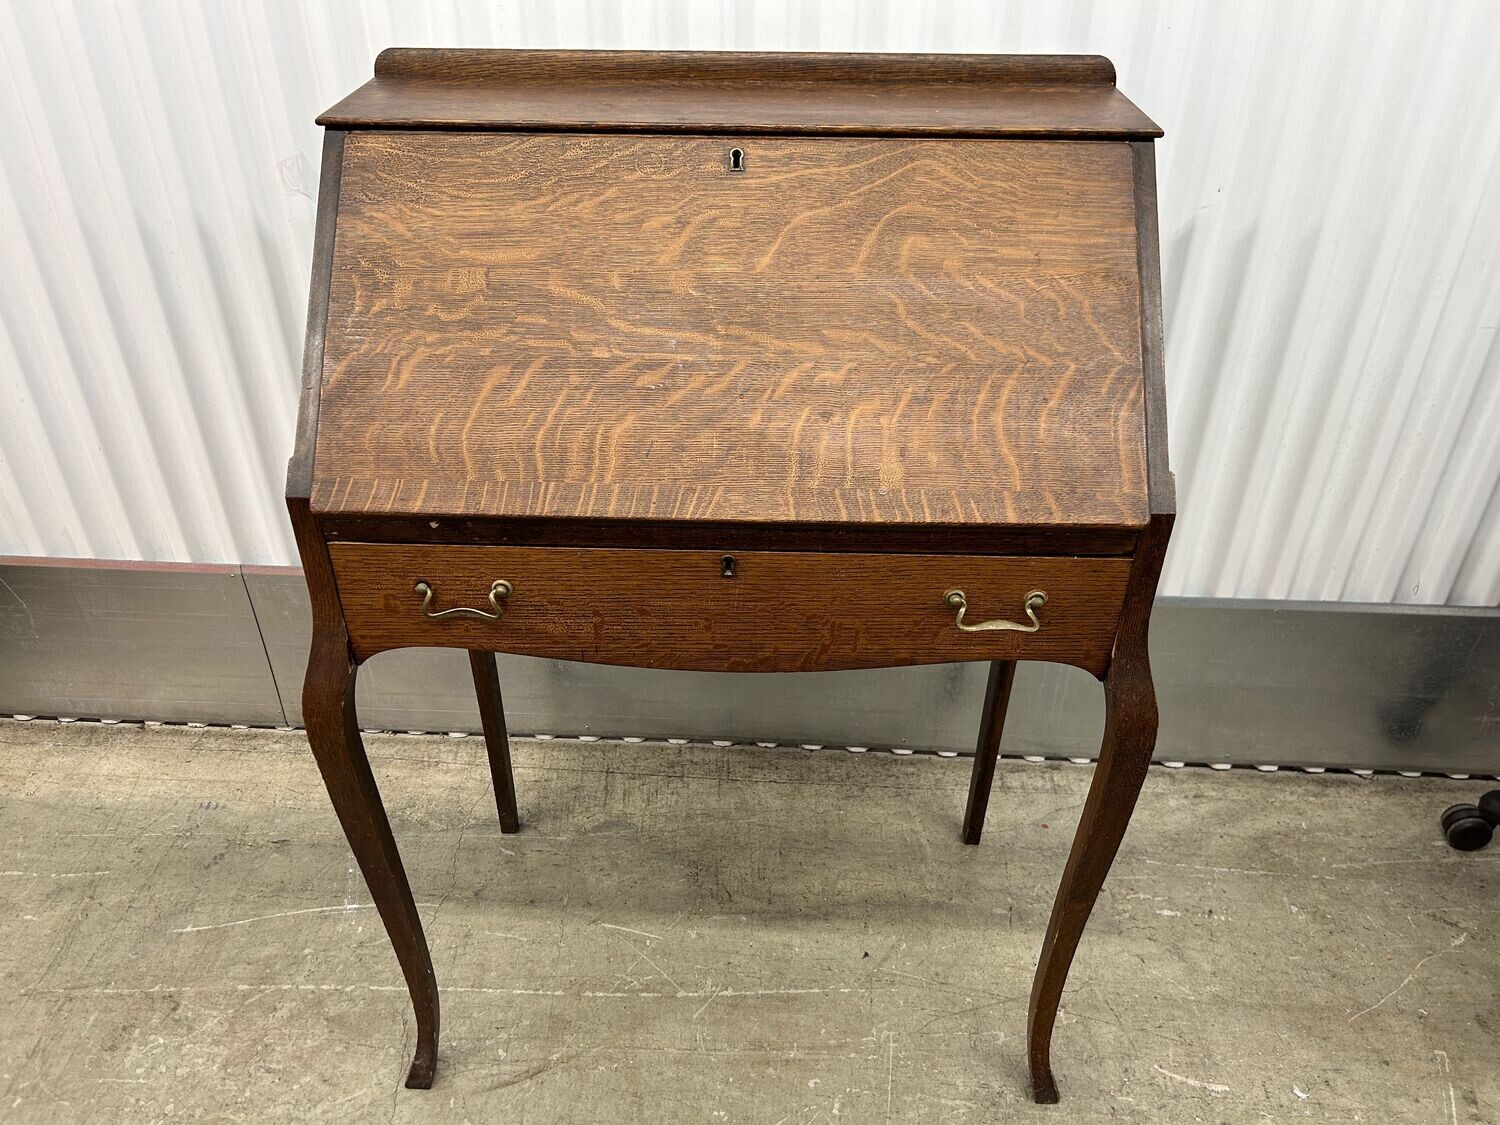 Antique Tiger Oak Secretary Desk, curved legs #2114 ** 1 wk. to sell, full price